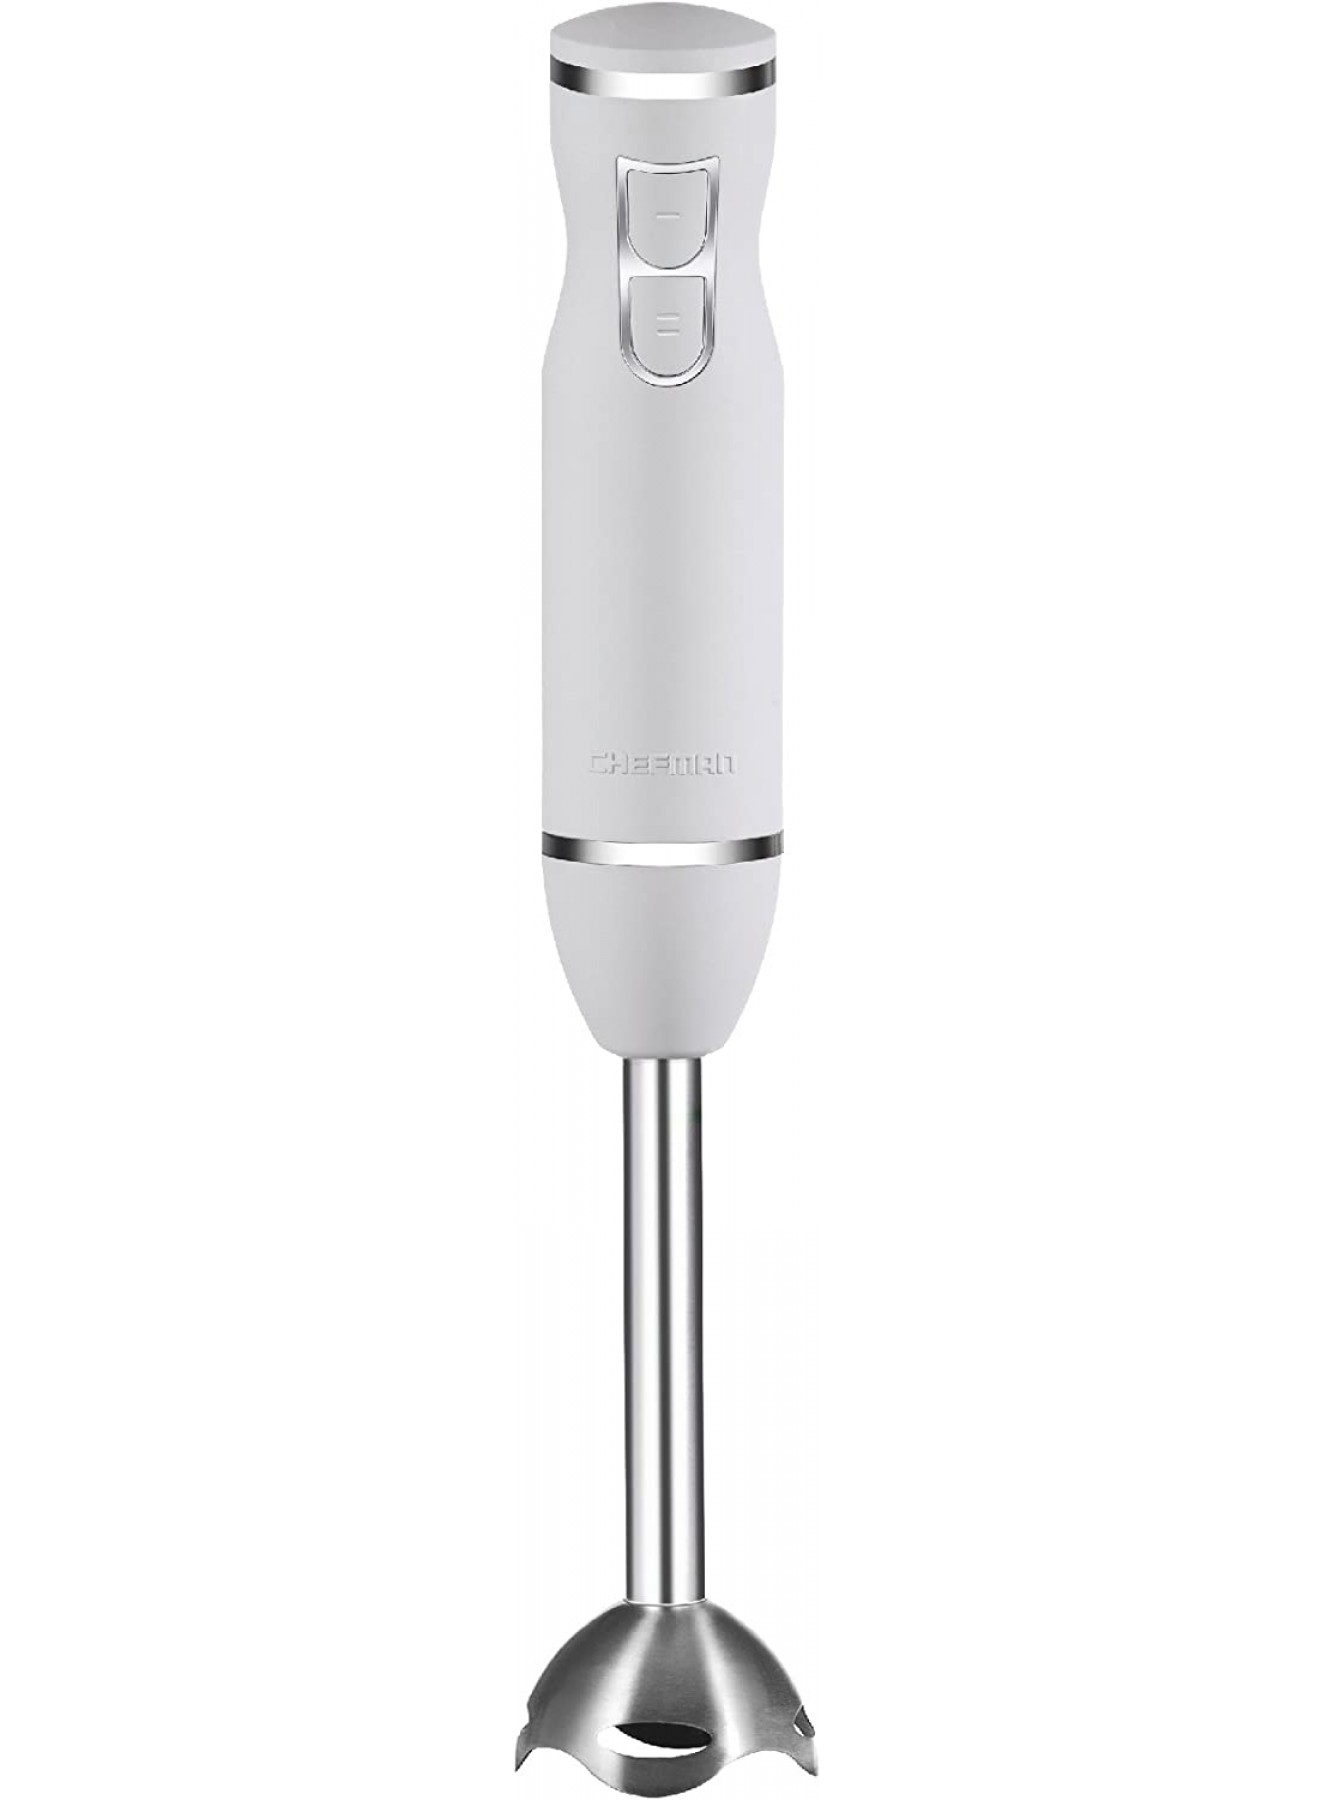 https://www.instagramscraperapi.com/image/cache/data/category_82/chefman-immersion-stick-hand-blender-with-stainless-steel-shaft-and-blades-powerful-ic-3629-1335x1800.jpg